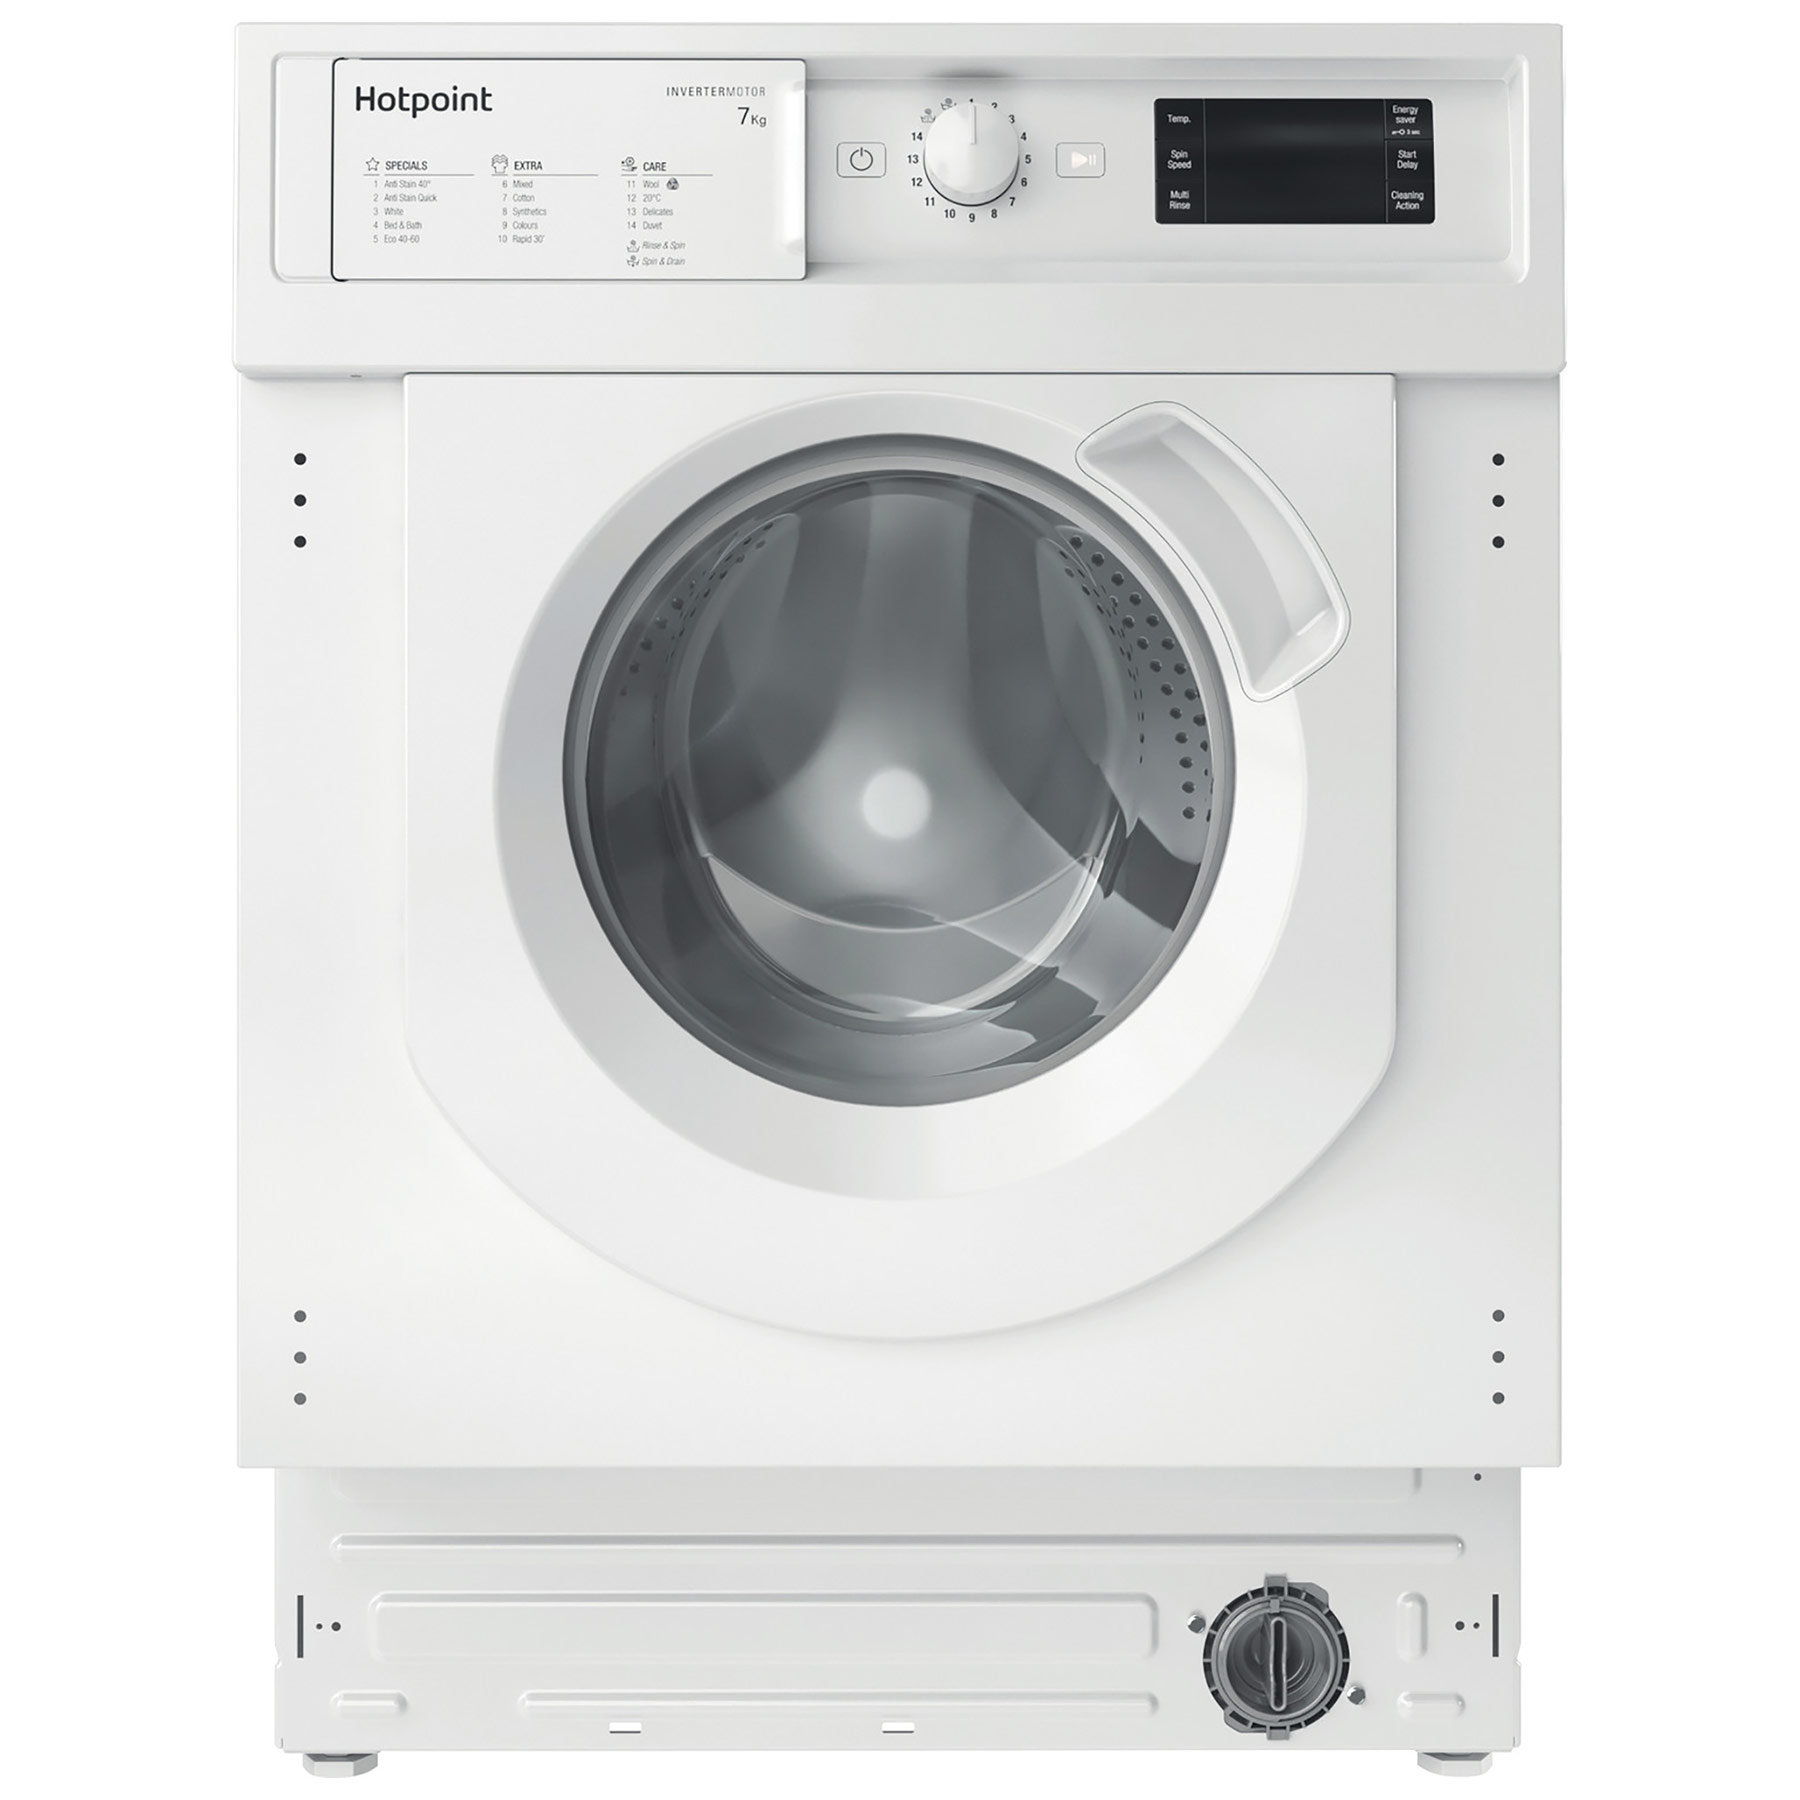 Image of Hotpoint BIWMHG71483 Integrated Washing Machine 1400rpm 7kg D Rated